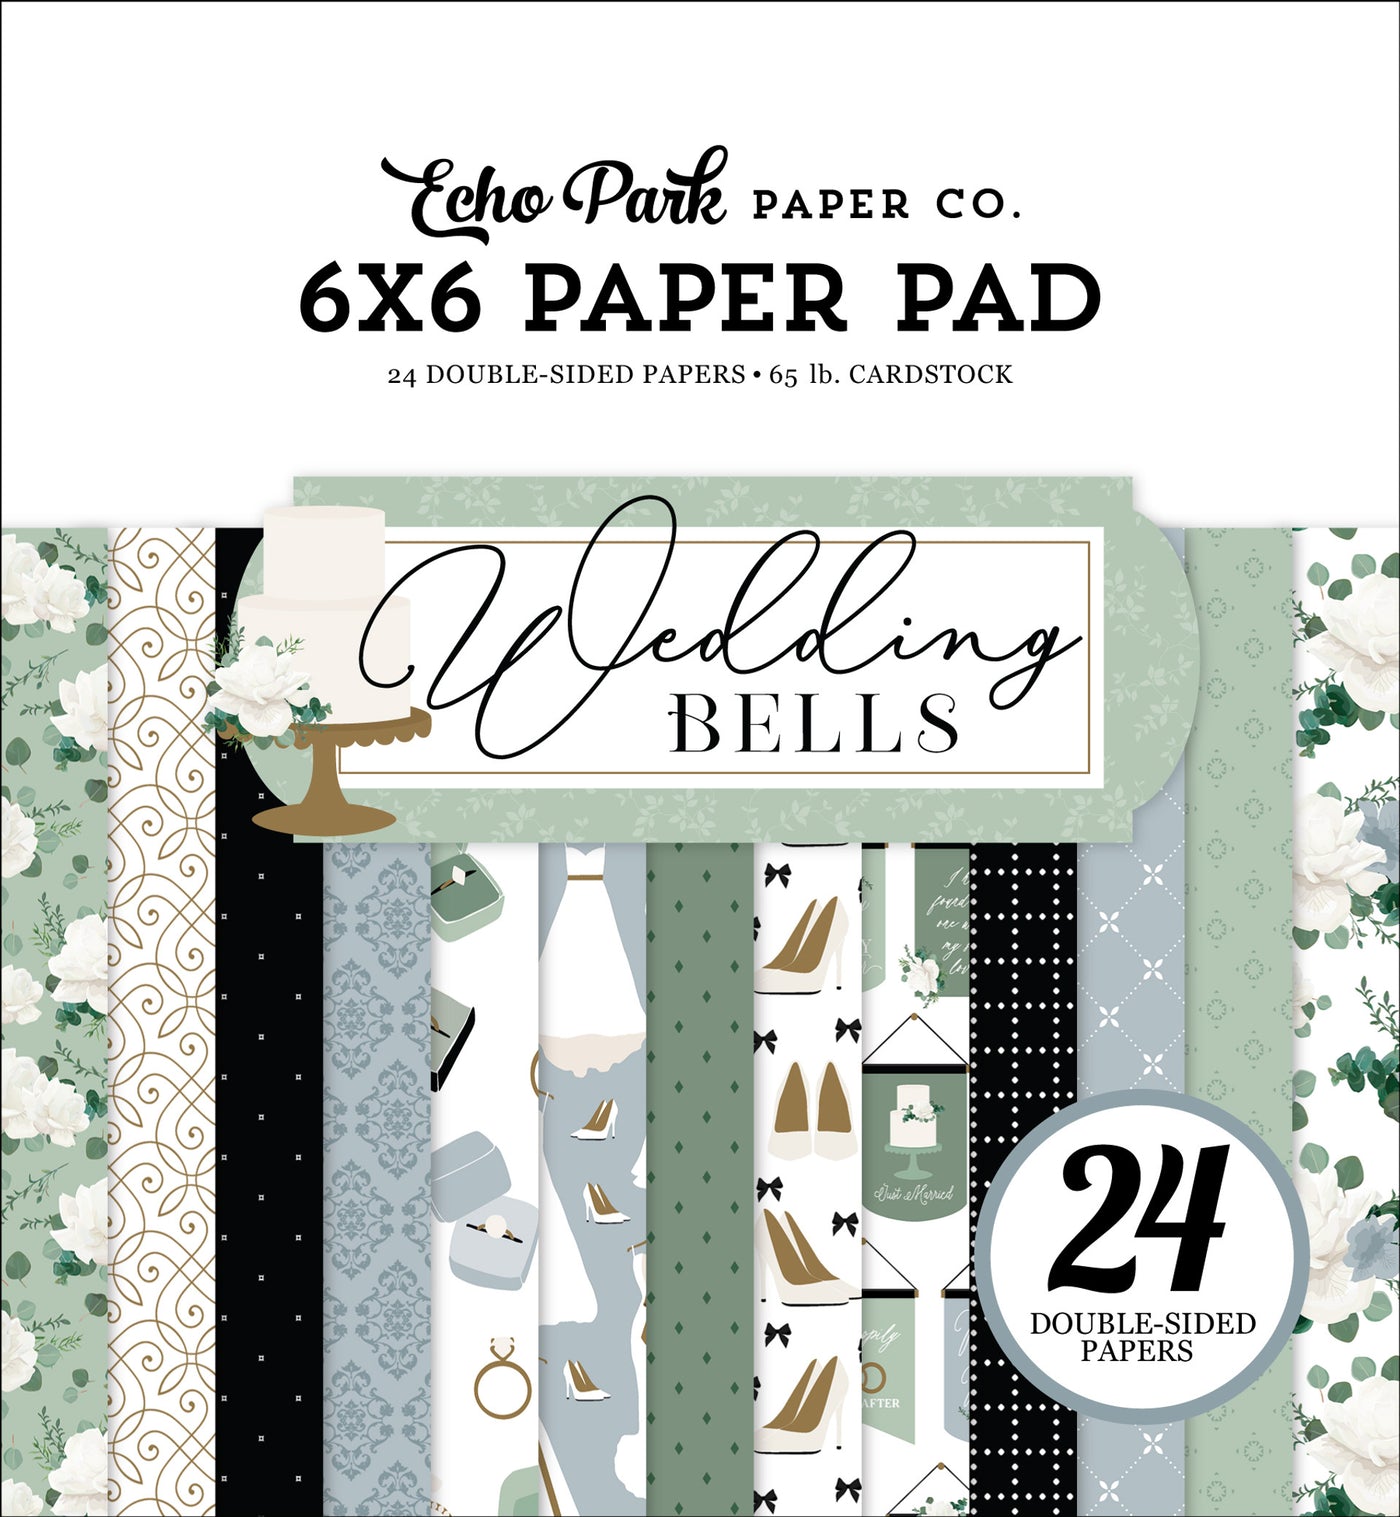 WEDDING BELLS 6x6 Paper Pad from Echo Park—This 6x6 pad features a wedding theme in lovely colors and patterns. It is fun for cards and paper crafts and includes 24 double-sided pages.